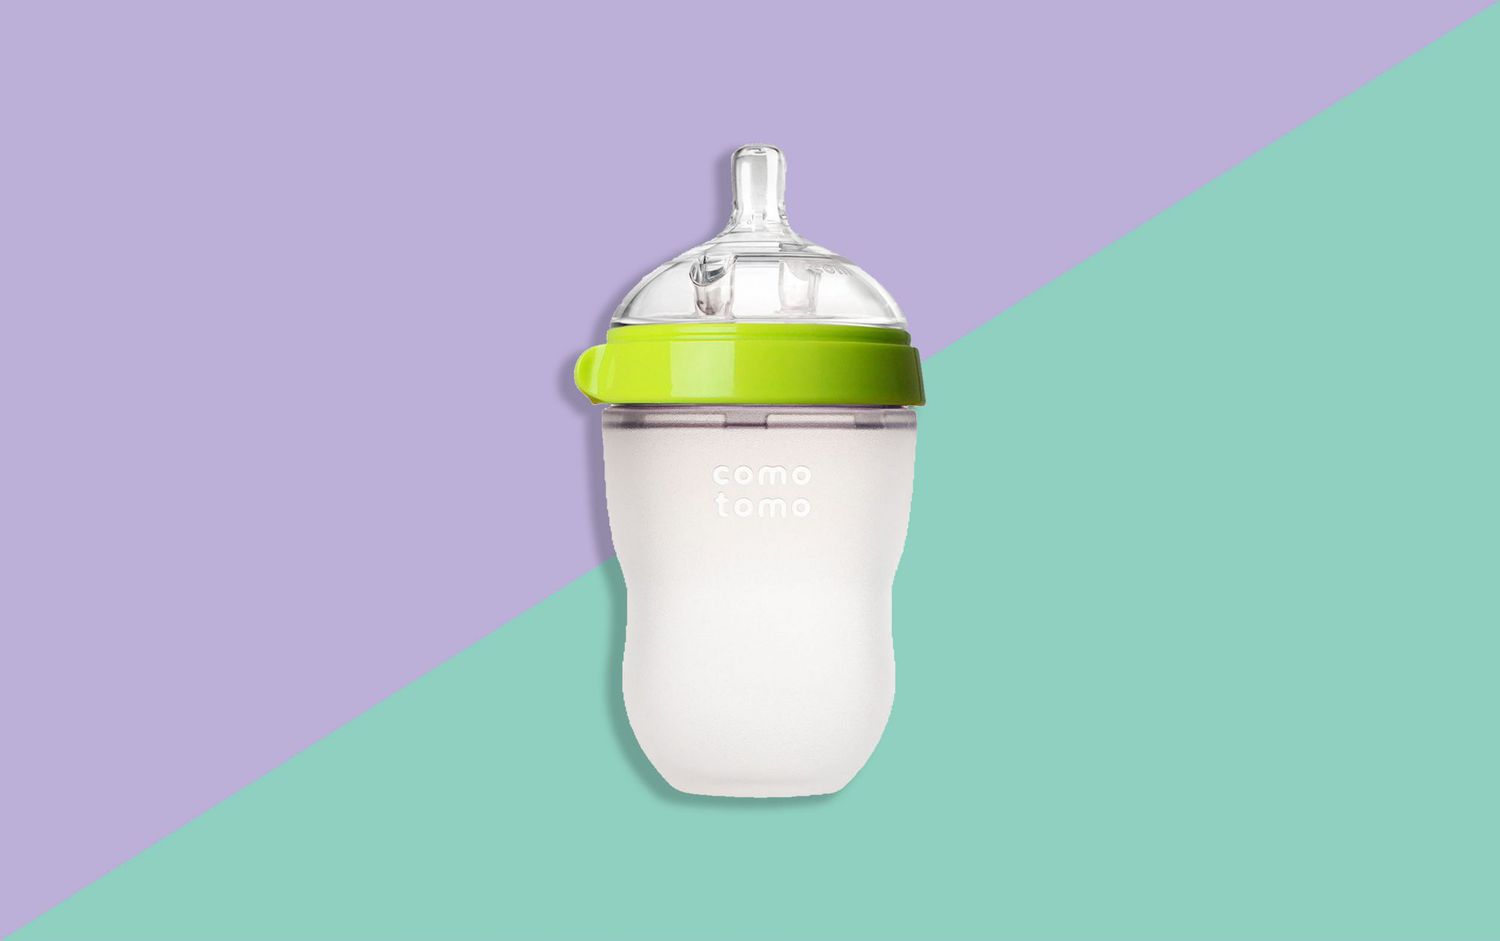 best baby bottle for 8 month old